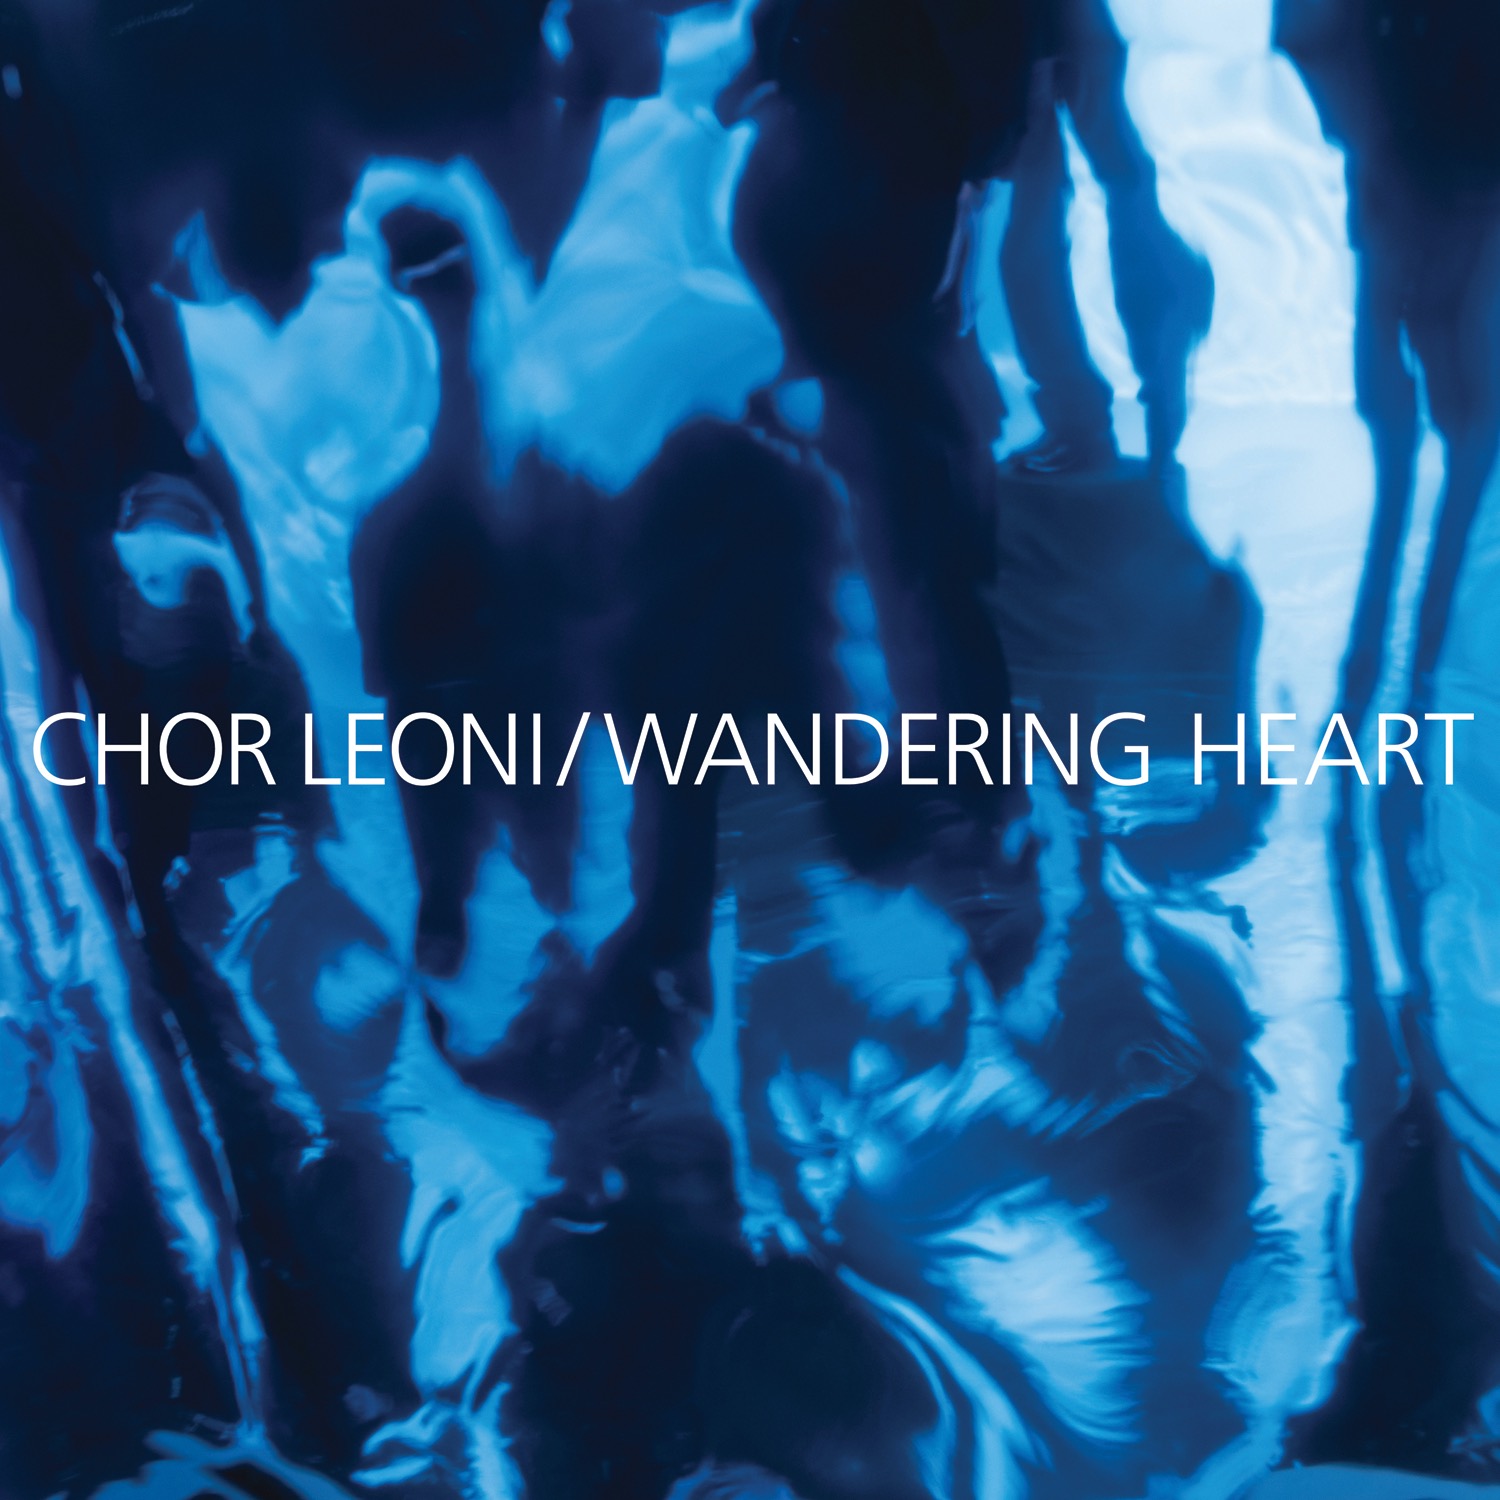 Wandering Heart CD cover